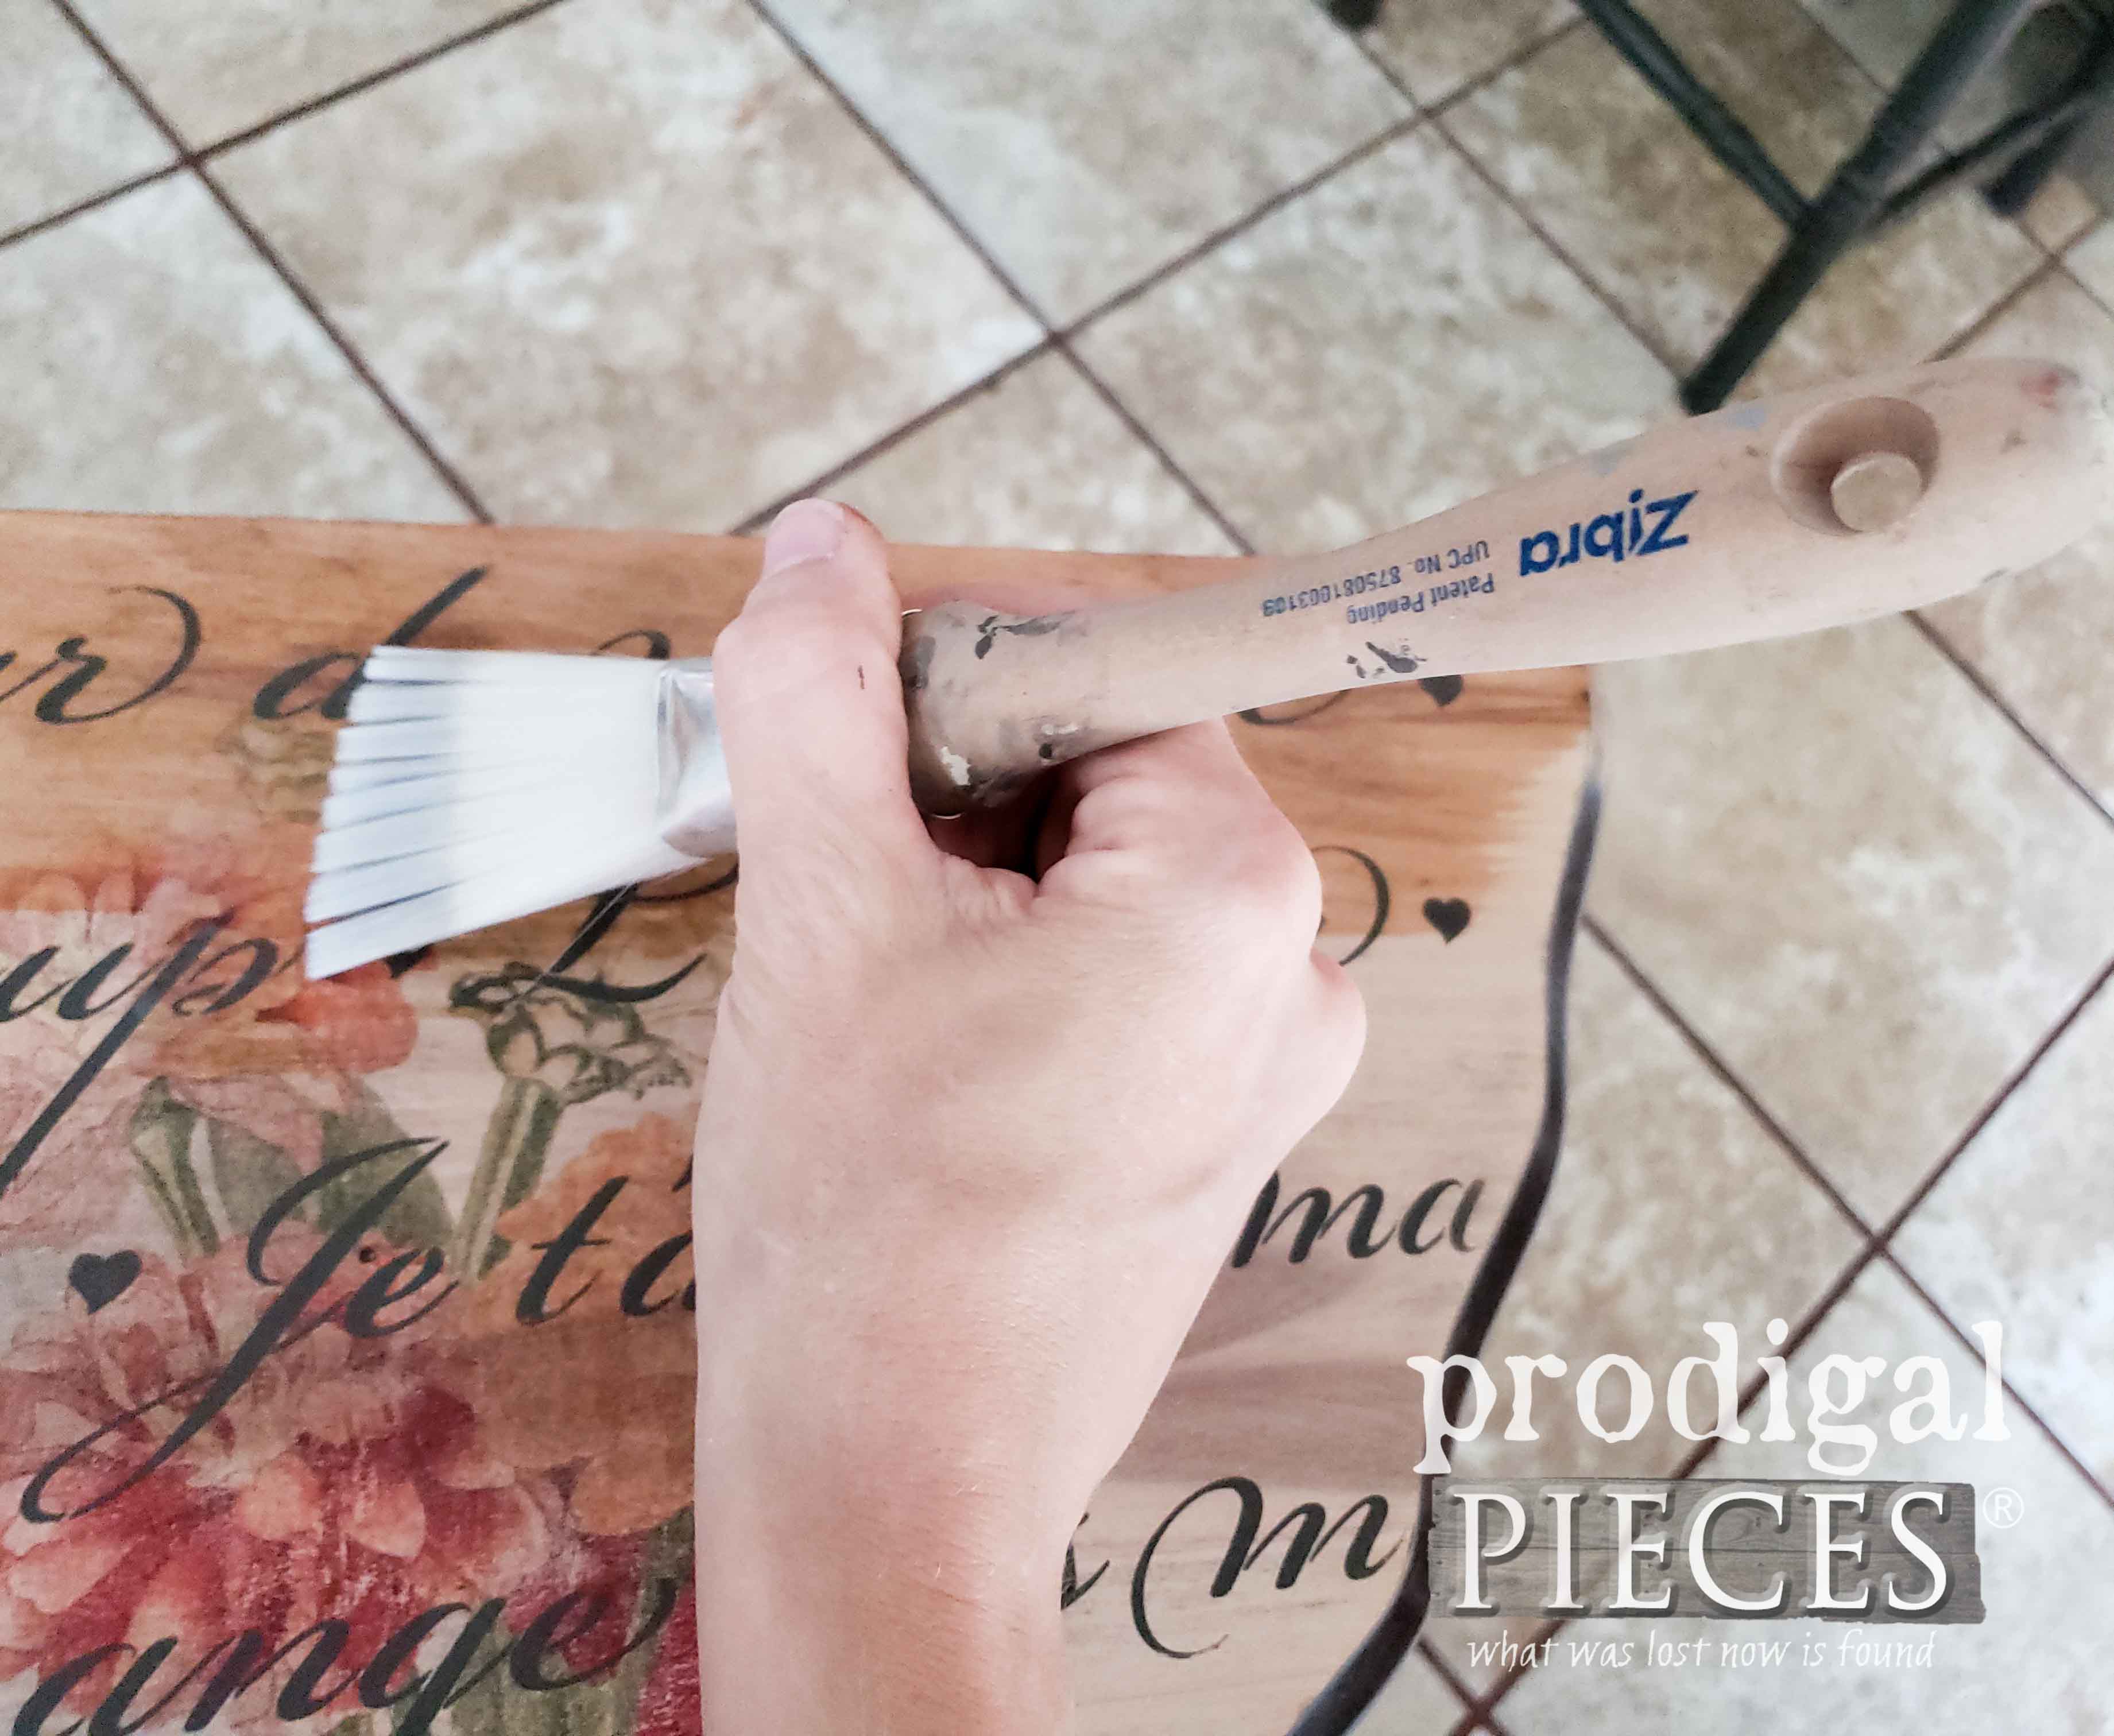 Zibra Fan Paint Brush for Applying Topcoat to Vintage Table by Larissa of Prodigal Pieces | prodigalpieces.com